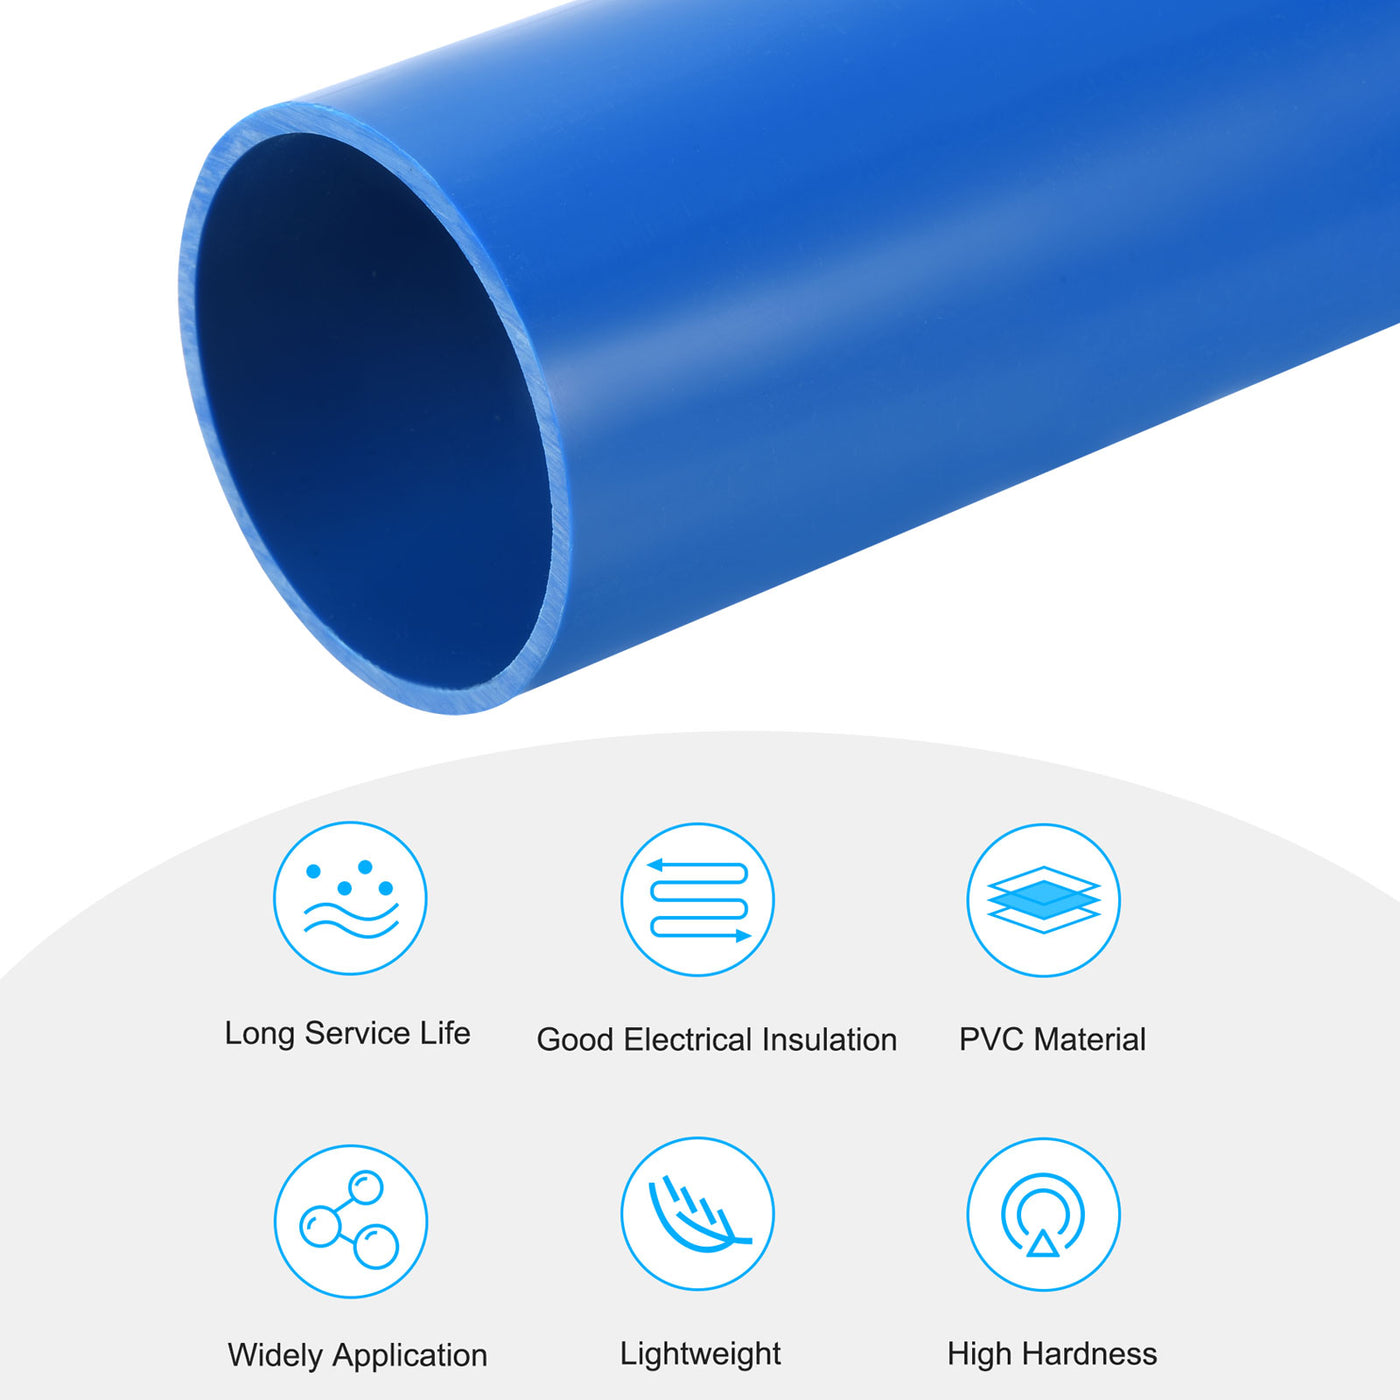 Harfington PVC Rigid Round Pipe 57mm ID 63mm OD 350mm Blue High Impact for Water Pipe Crafts Cable Sleeve